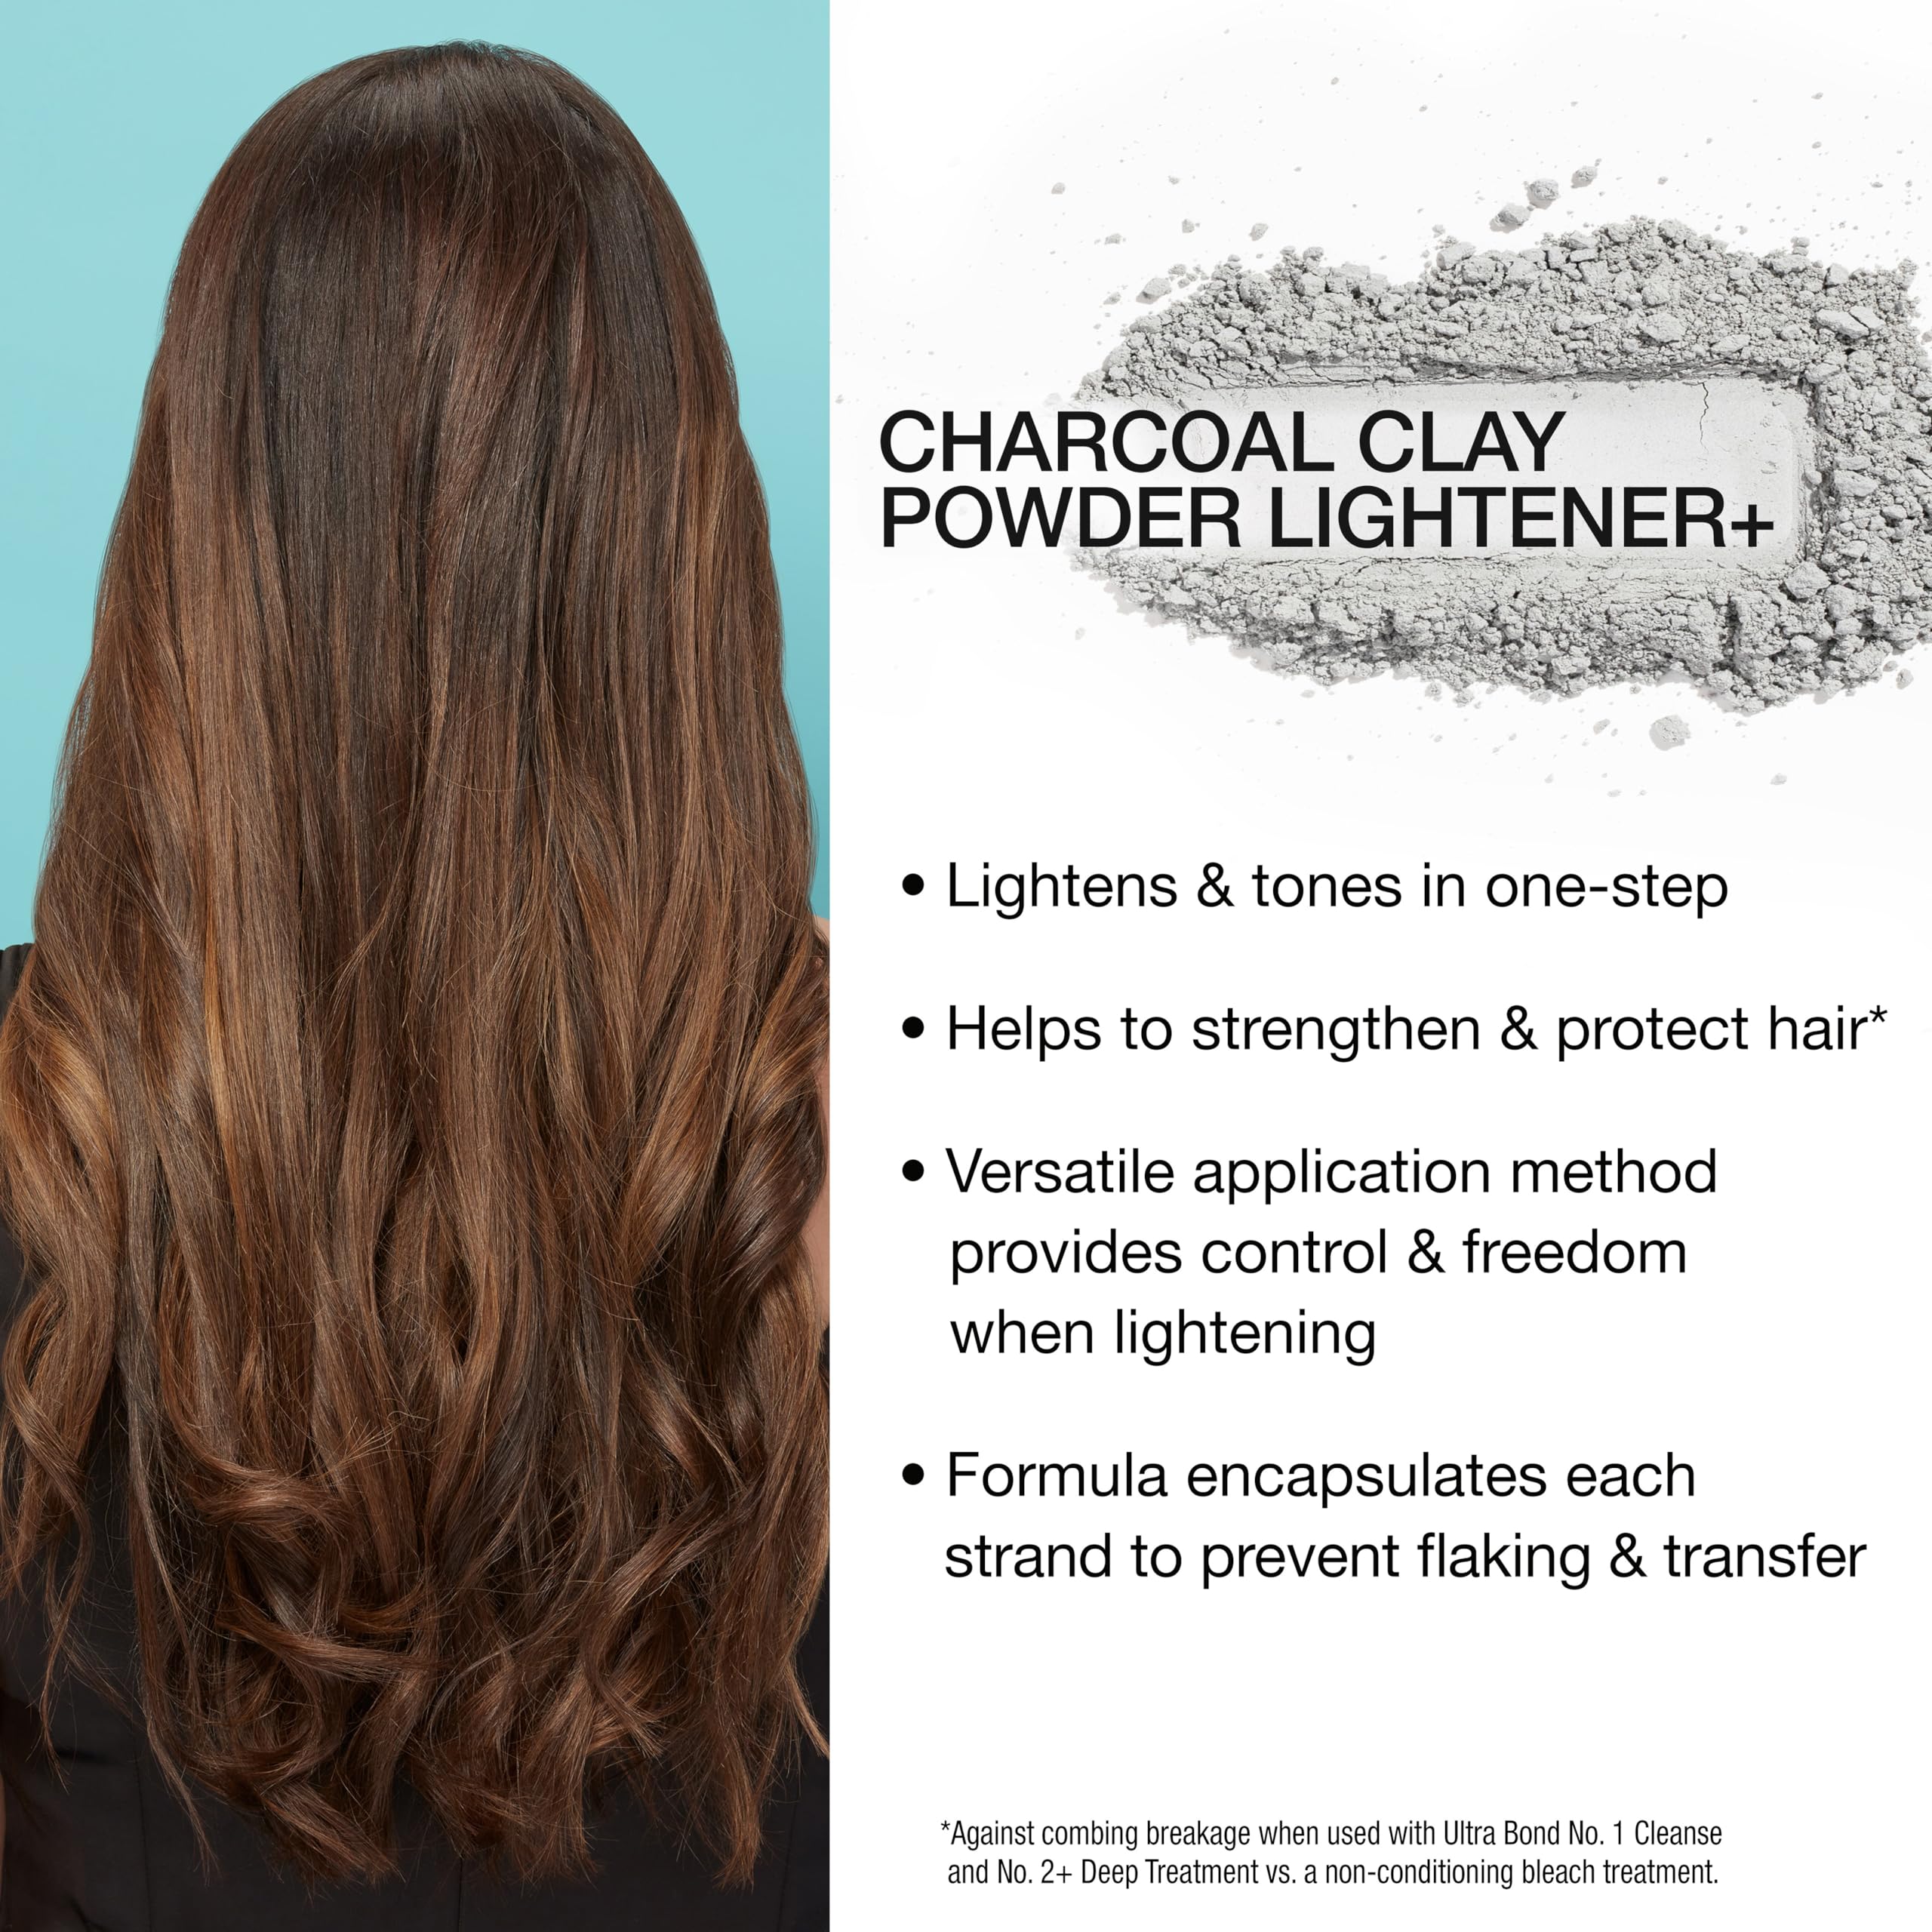 ULTRA BOND Charcoal Clay Powder Lightener with Built-in Bonding | Strengthens & Protects for Stronger & Shinier Hair | Lightens & Tones in One-Step